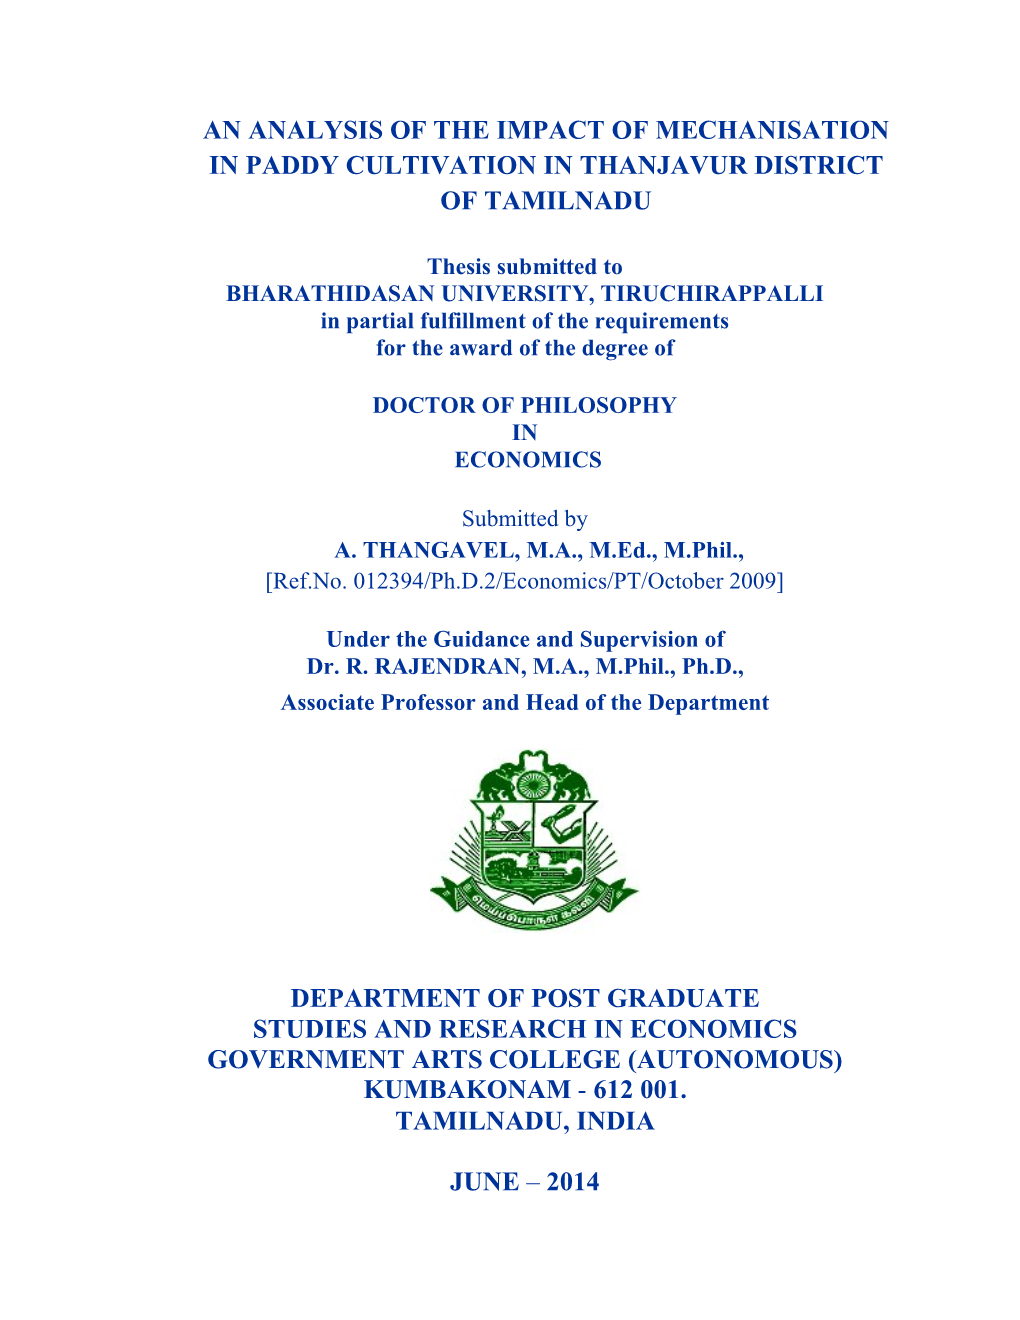 An Analysis of the Impact of Mechanisation in Paddy Cultivation in Thanjavur District of Tamilnadu